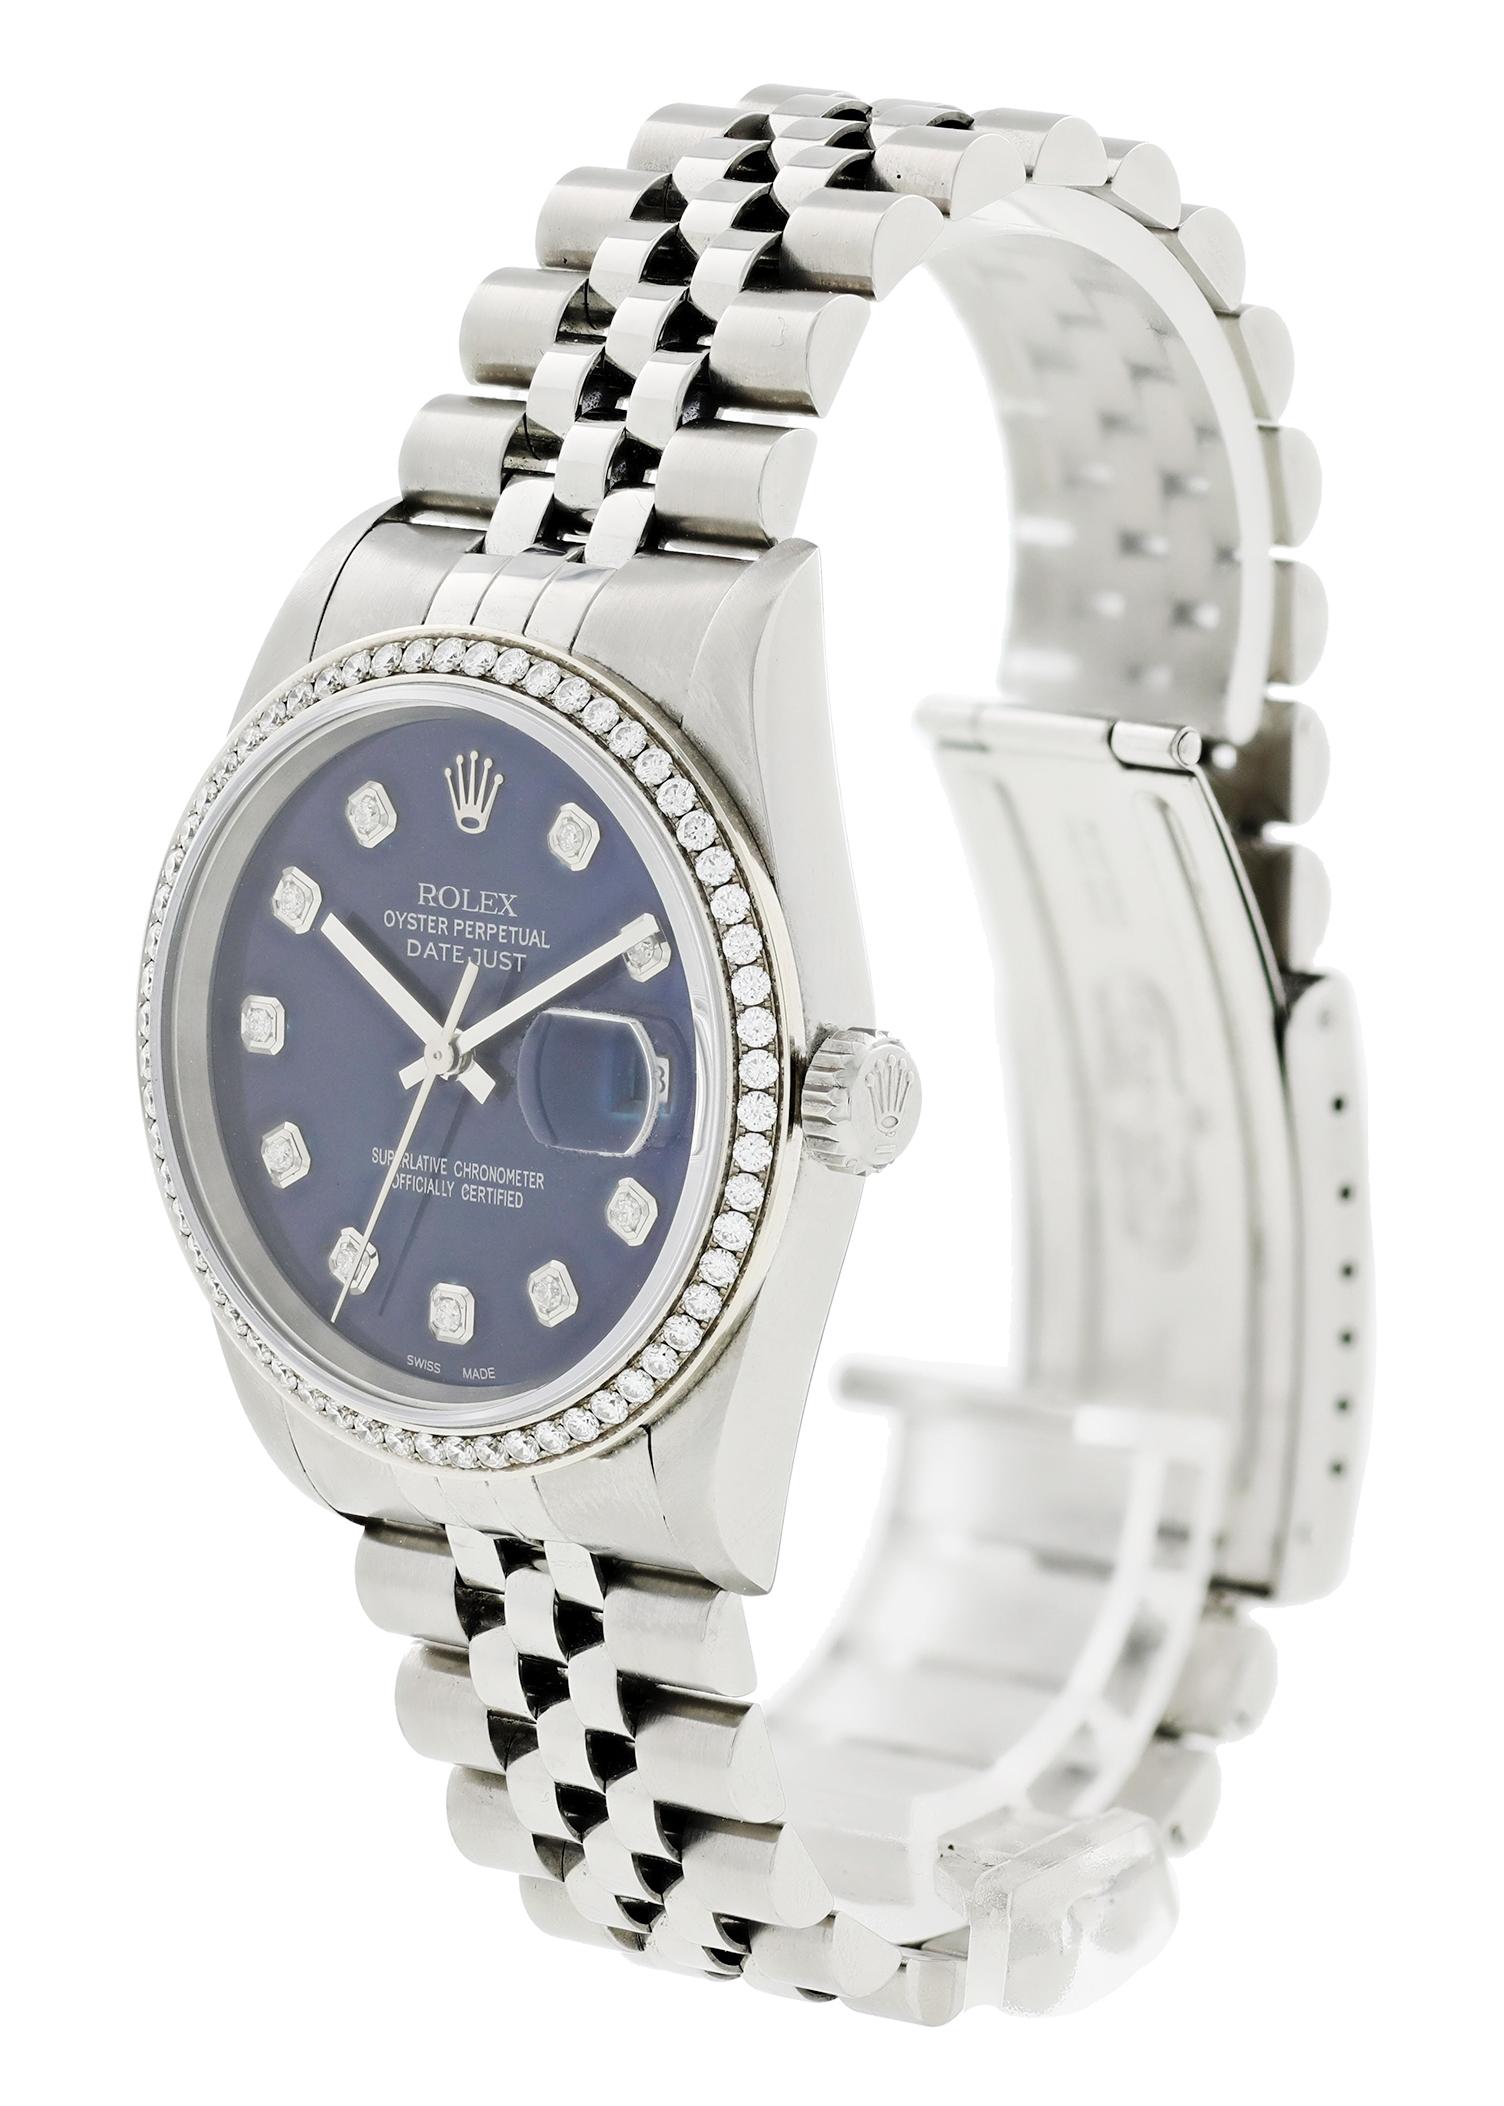 Rolex Datejust 16234 Men Watch. 
36mm Stainless Steel case. 
Stationary diamond bezel. 
Blue dial with Steel hands and Dimond hour markers. 
Stainless Steel Bracelet with Fold Over Clasp. 
Will fit up to a 7-inch wrist. 
Sapphire Crystal, stainless